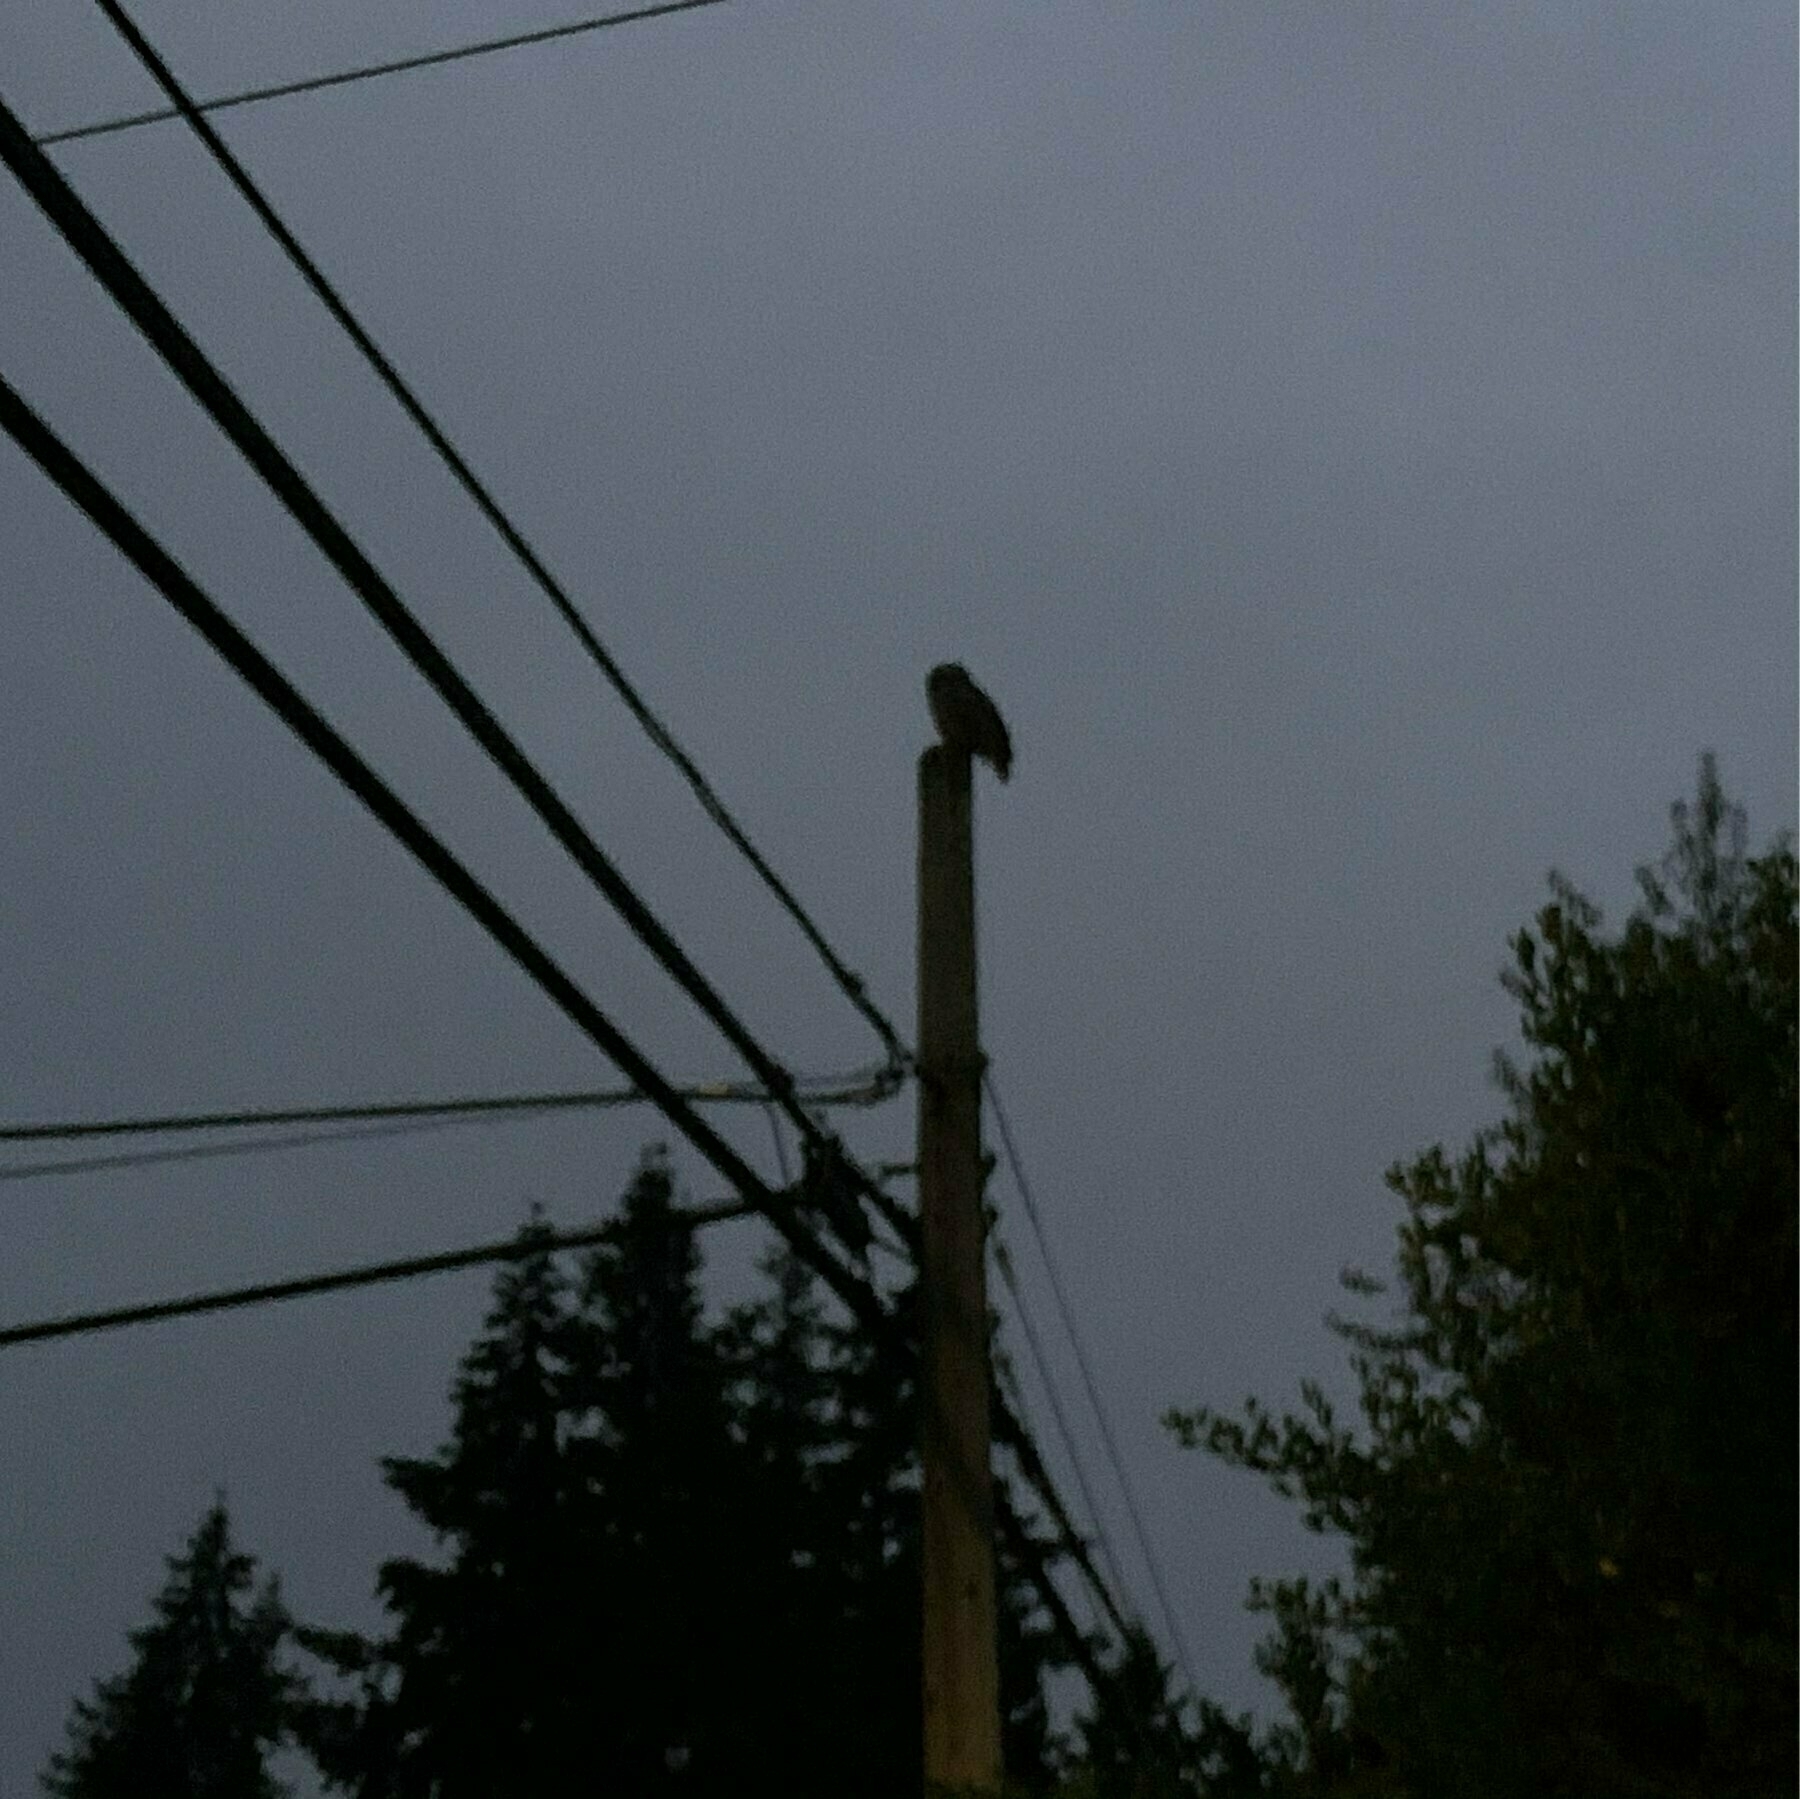 Owl perched atop a power pole